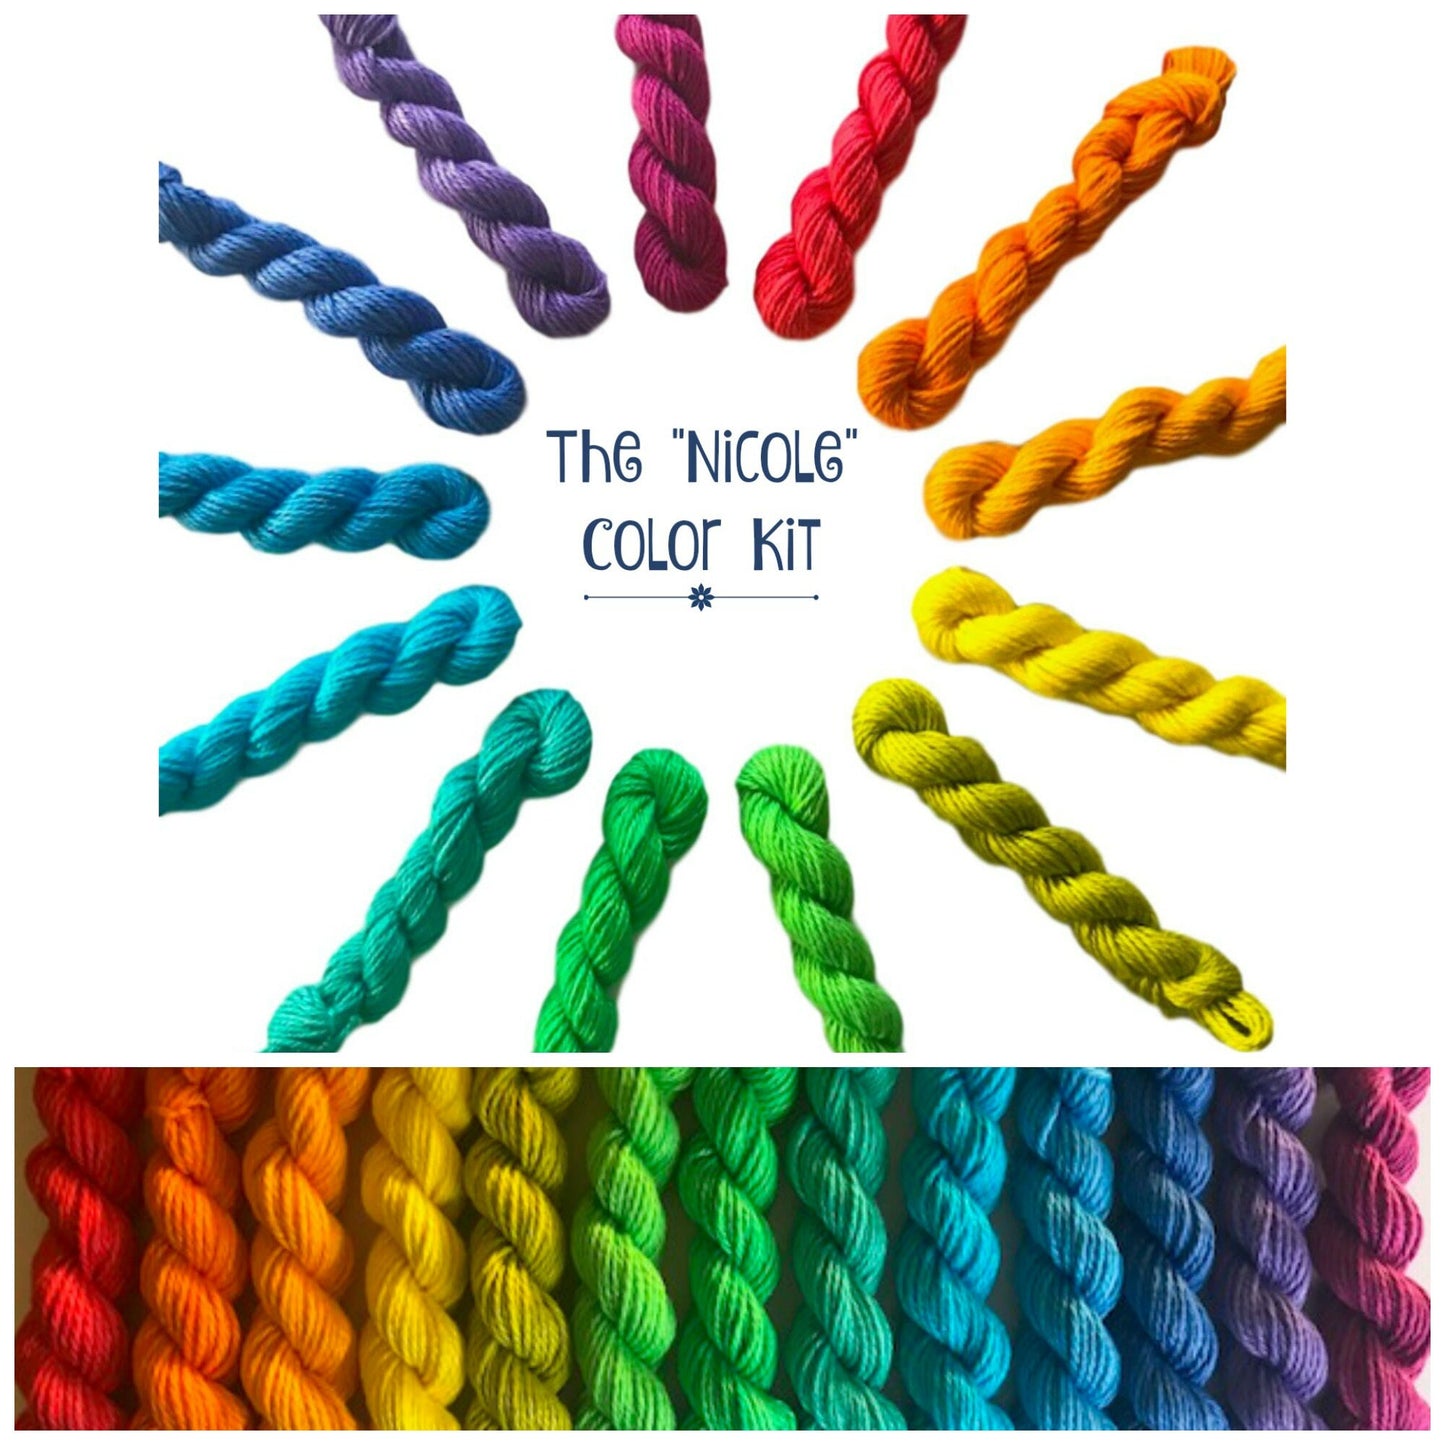 Indie Dyed Yarn Kit - "Nicole" - Bamboo Cotton Rainbow Fiber Set - 13 Bright Colors - DK Light Worsted - Semi Solids / Tonals - Ultra Minis